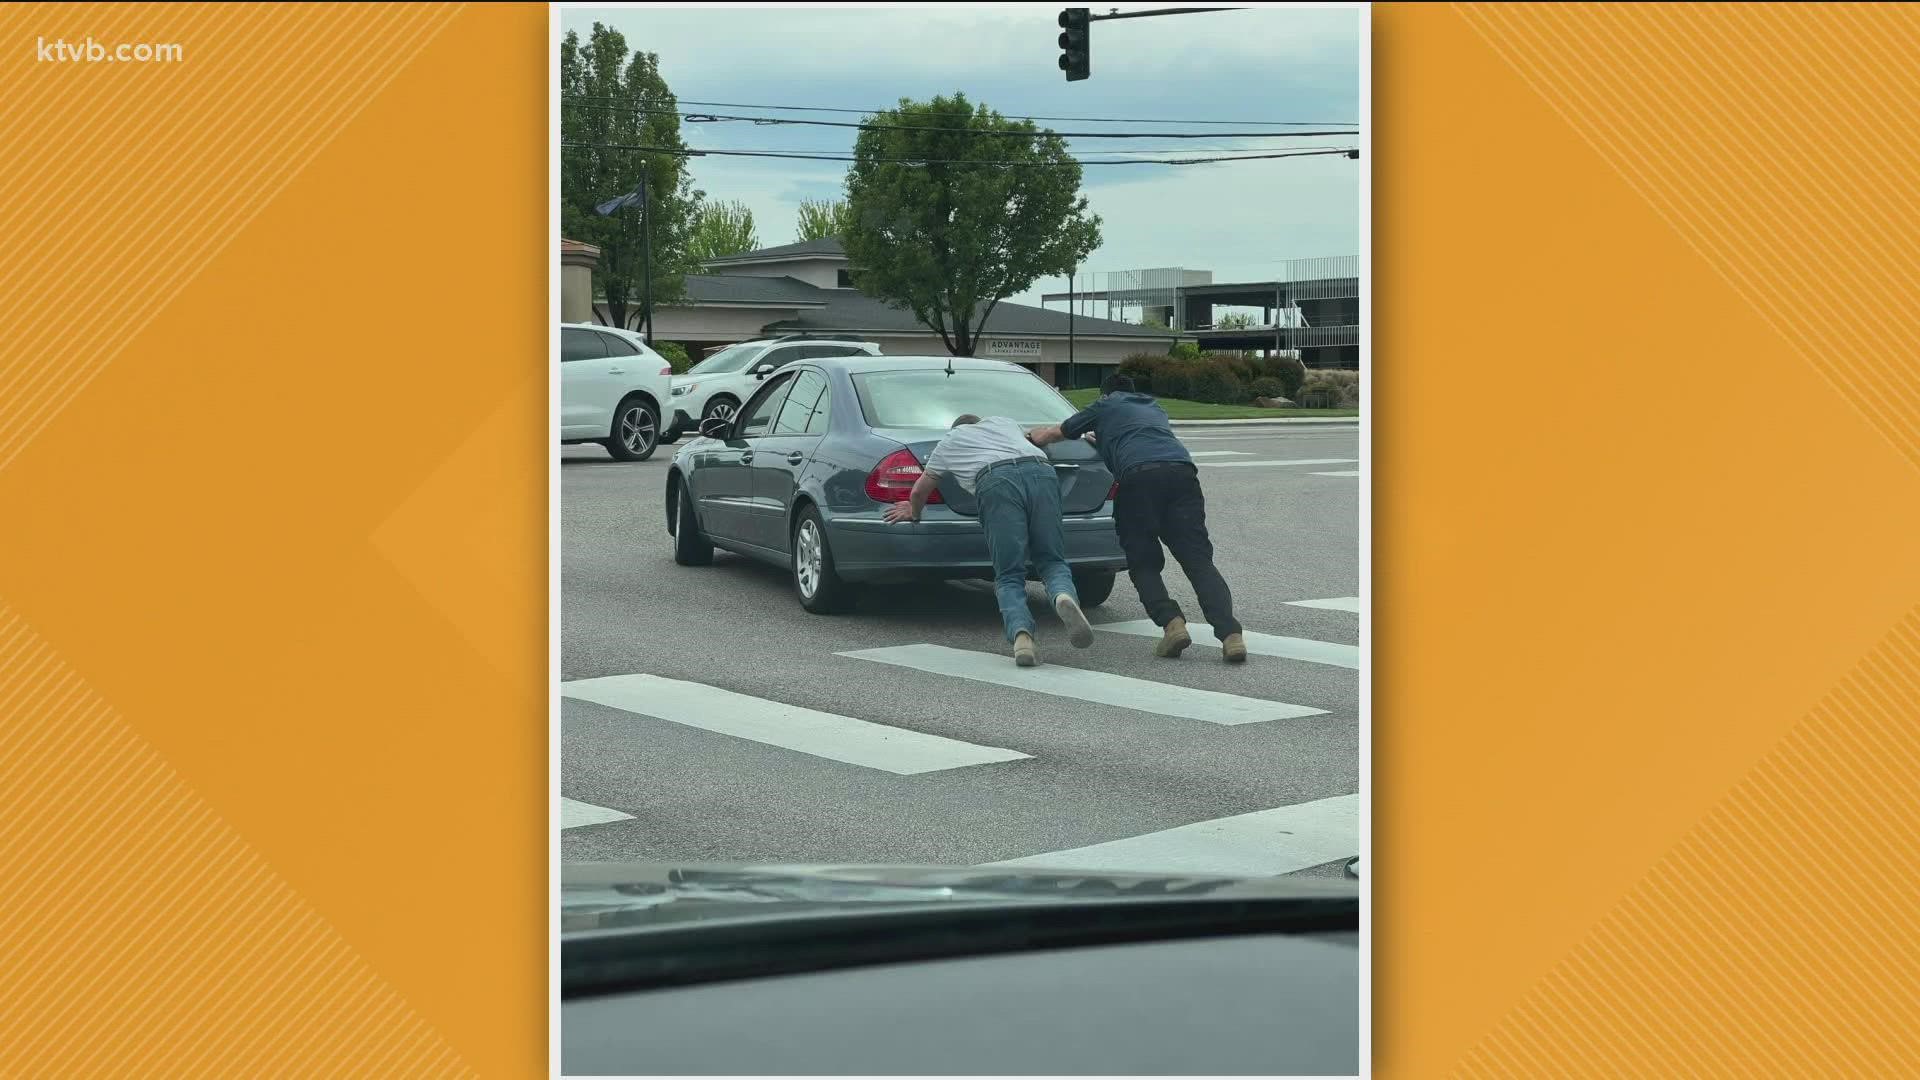 Good News: The two men helped the car out of traffic at Eagle Road and Overland Road. Also; Jacksons Food Stores raises more than $230,000 for Boys & Girls Clubs.